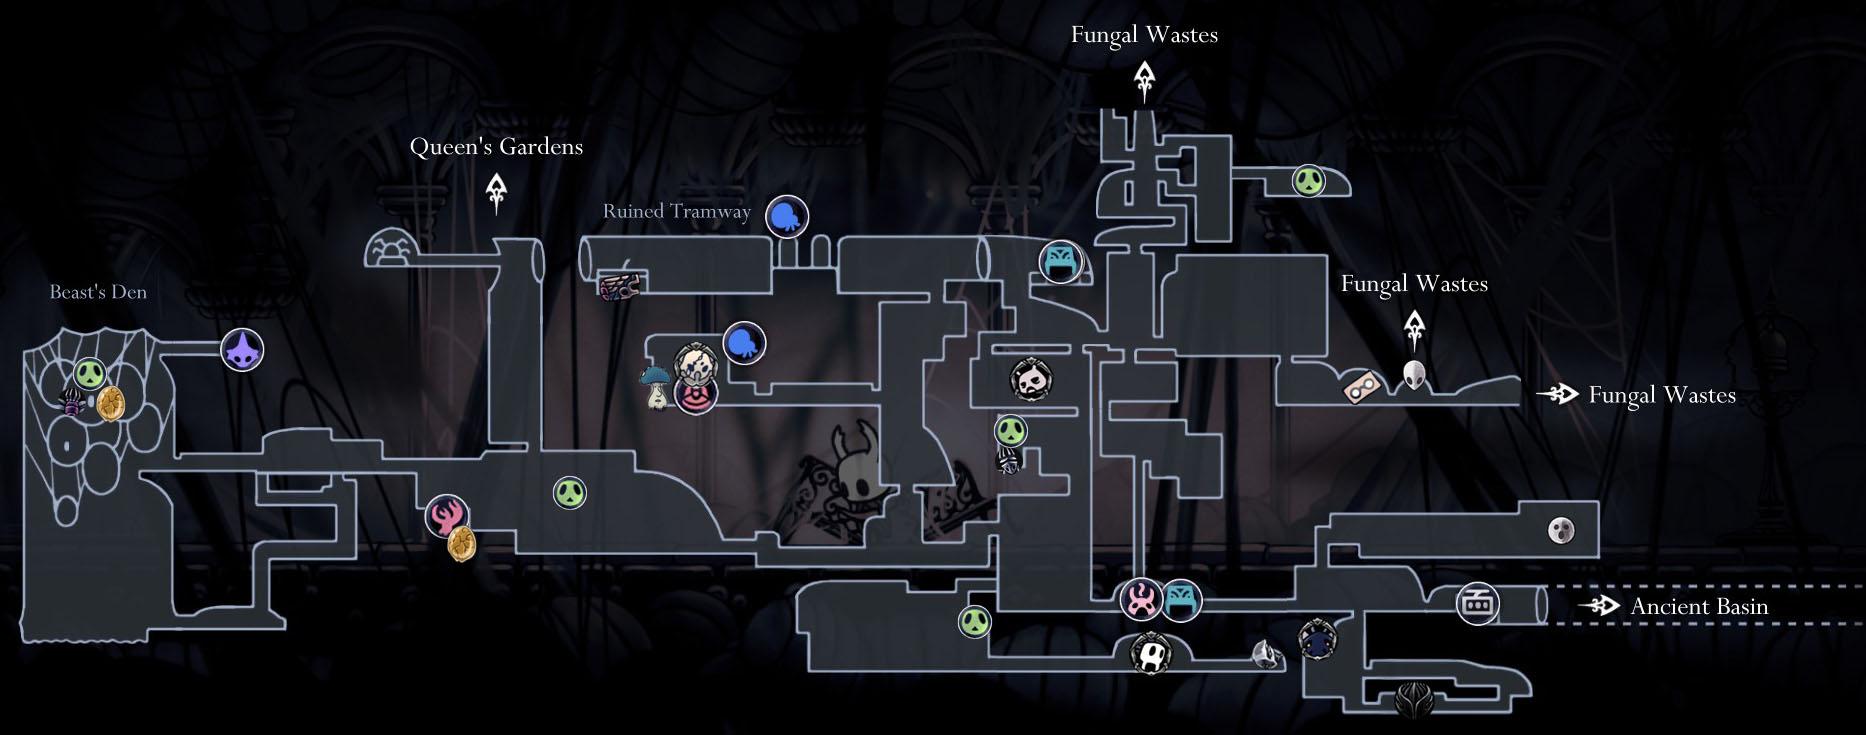 hollow knight fog canyon map without shade cloak